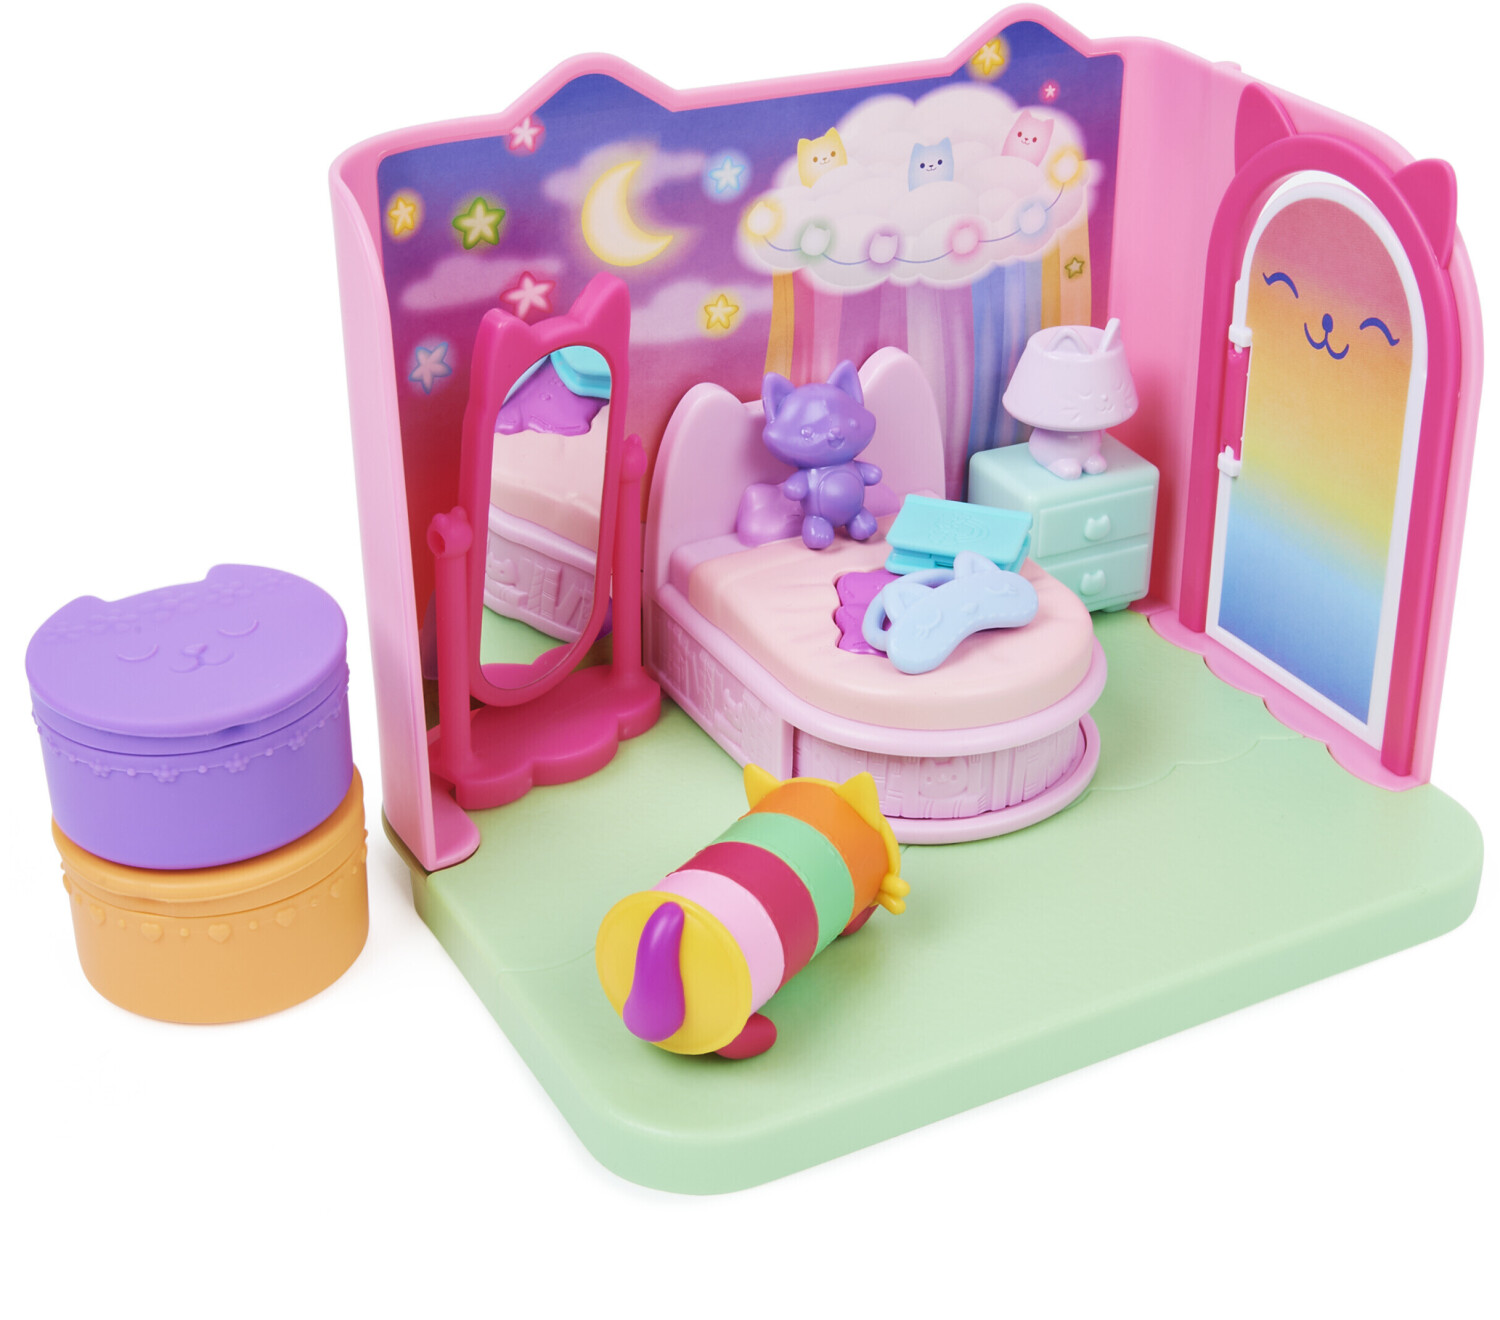 Gabby's Dollhouse Kitty White Toy Camera Spin Master - Cdiscount Jeux -  Jouets